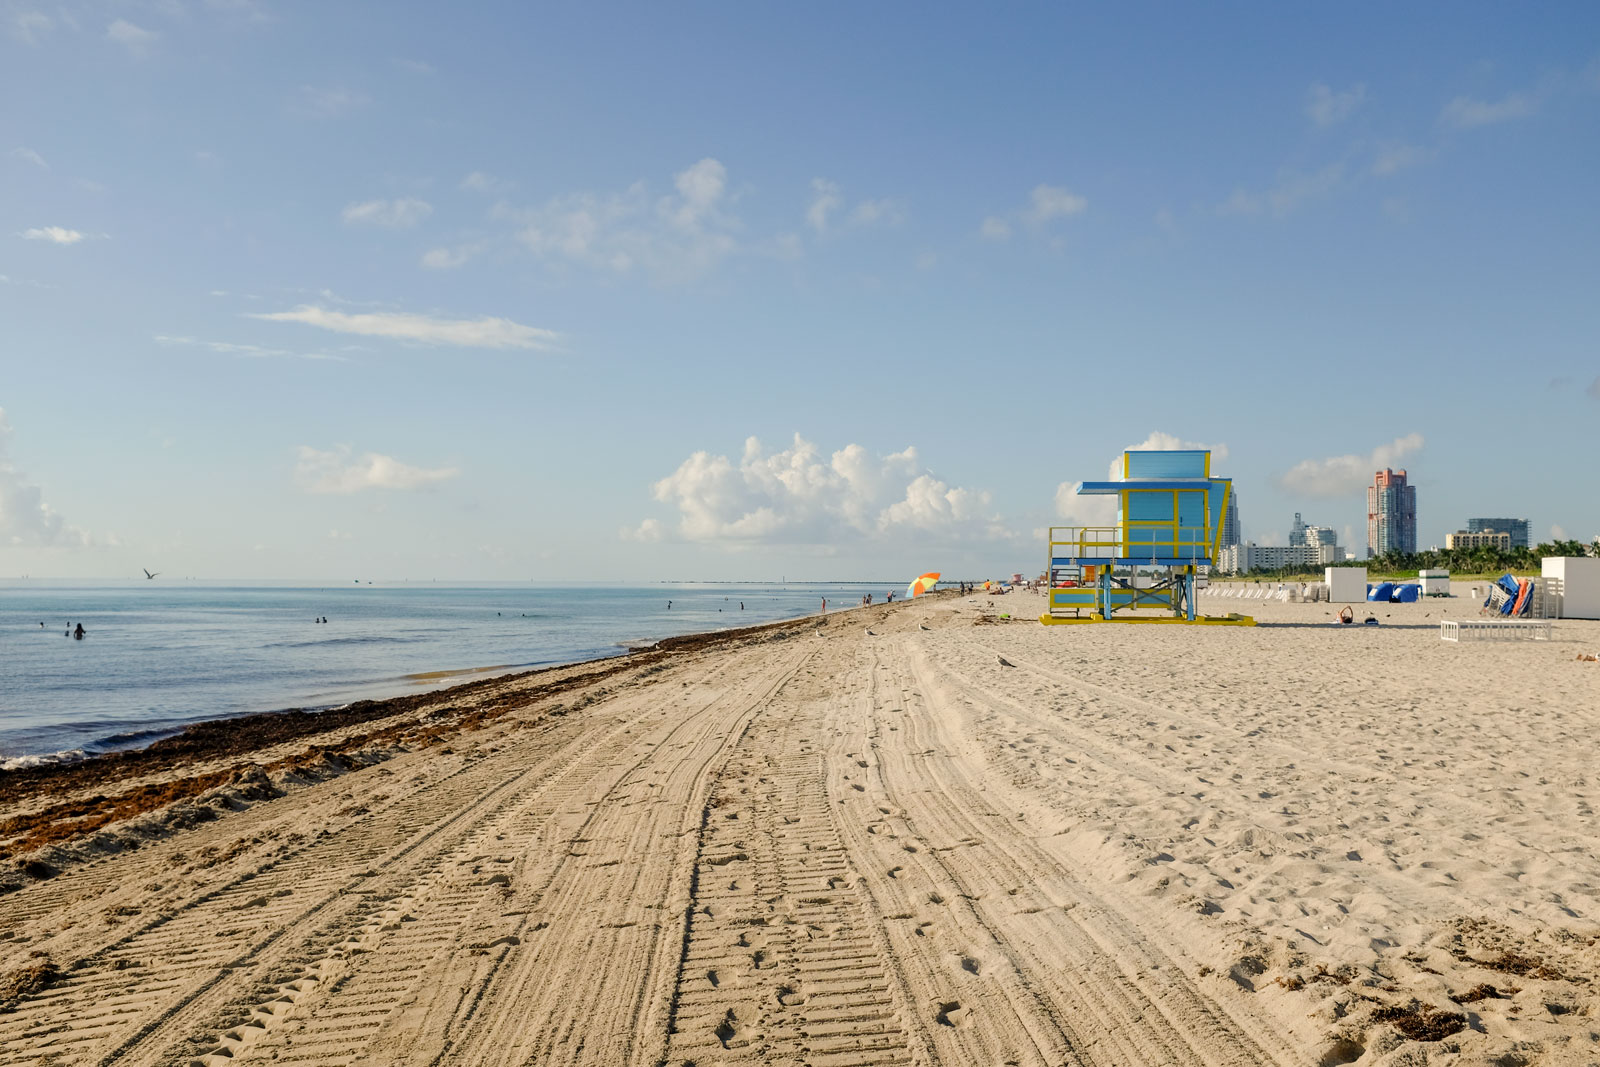 View of Miami Beach with a lifeguard stand